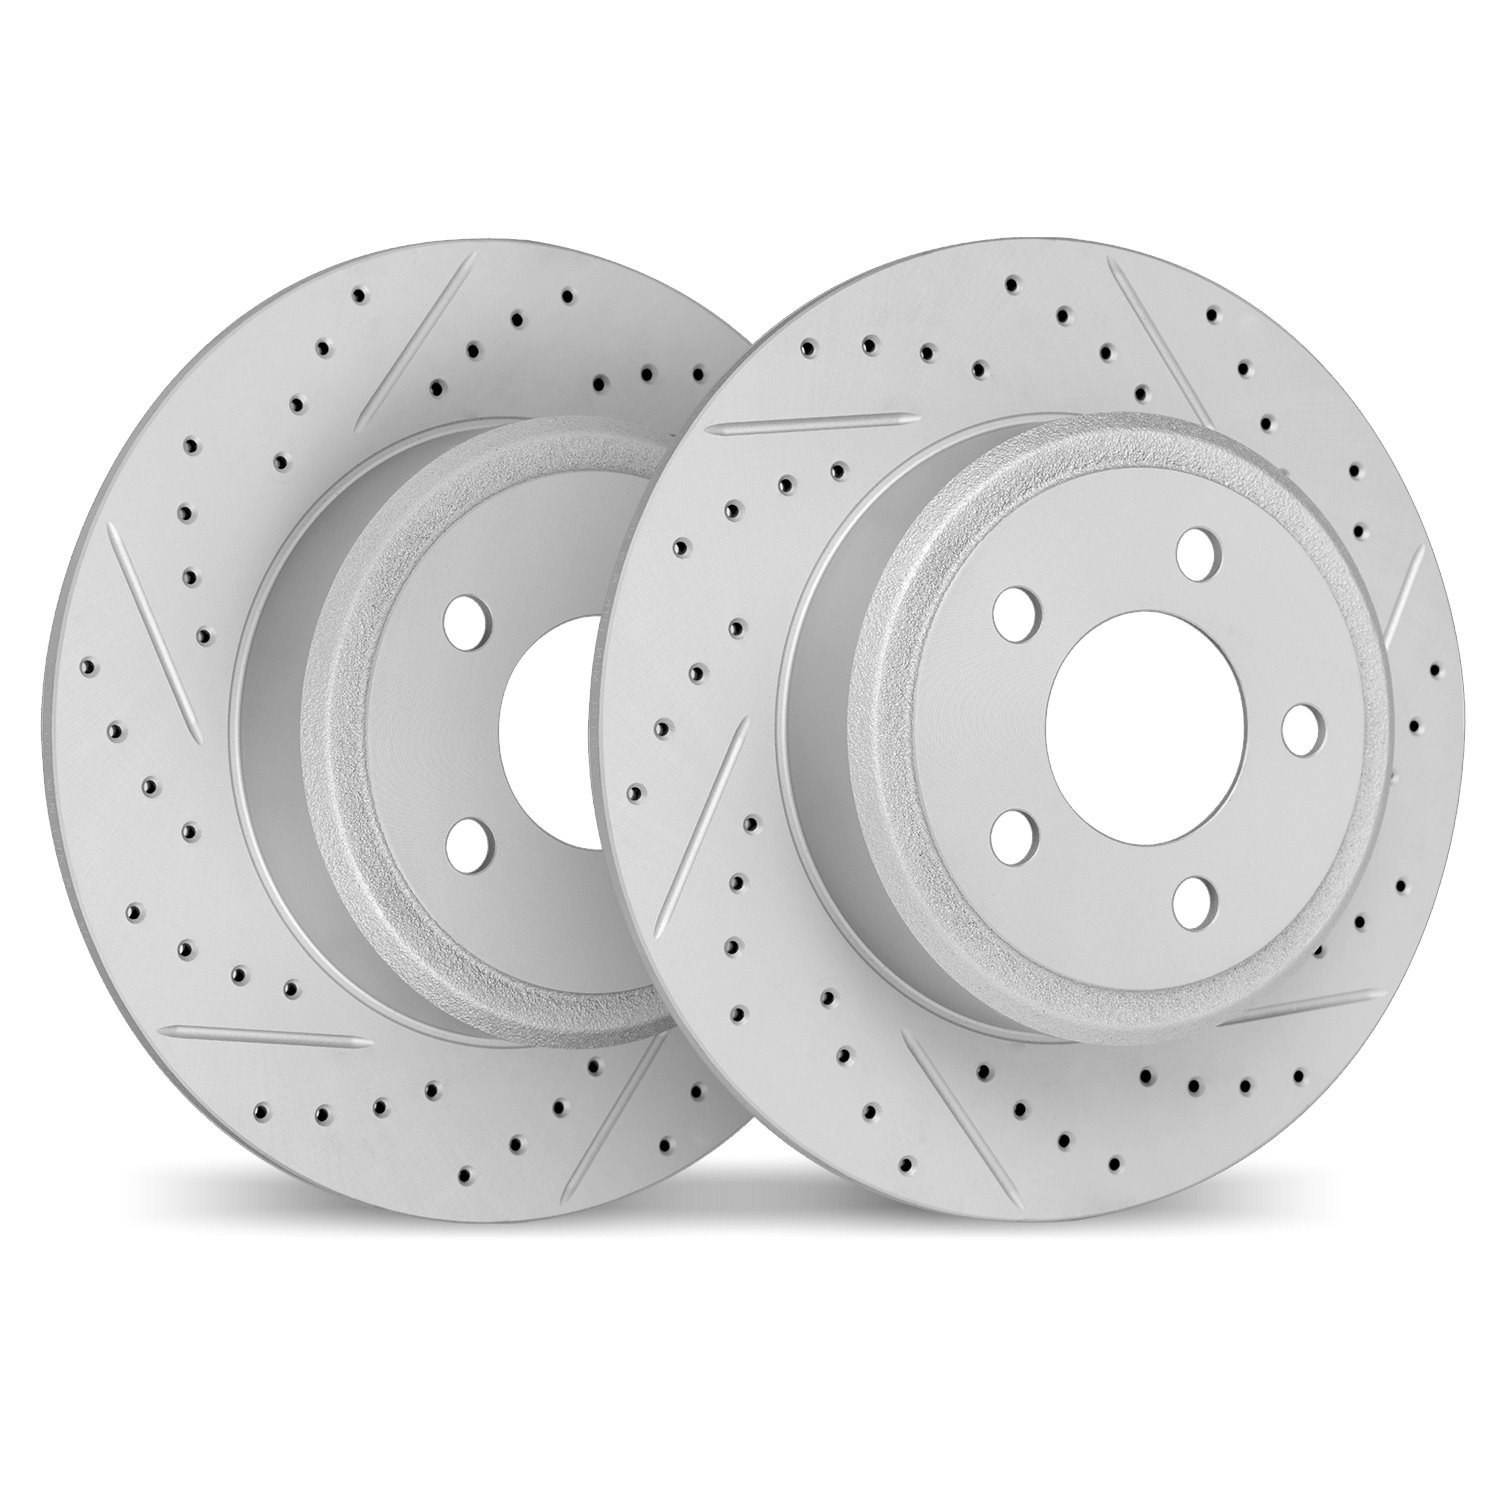 2002-31060 Geoperformance Drilled/Slotted Brake Rotors, 1995-1999 BMW, Position: Rear